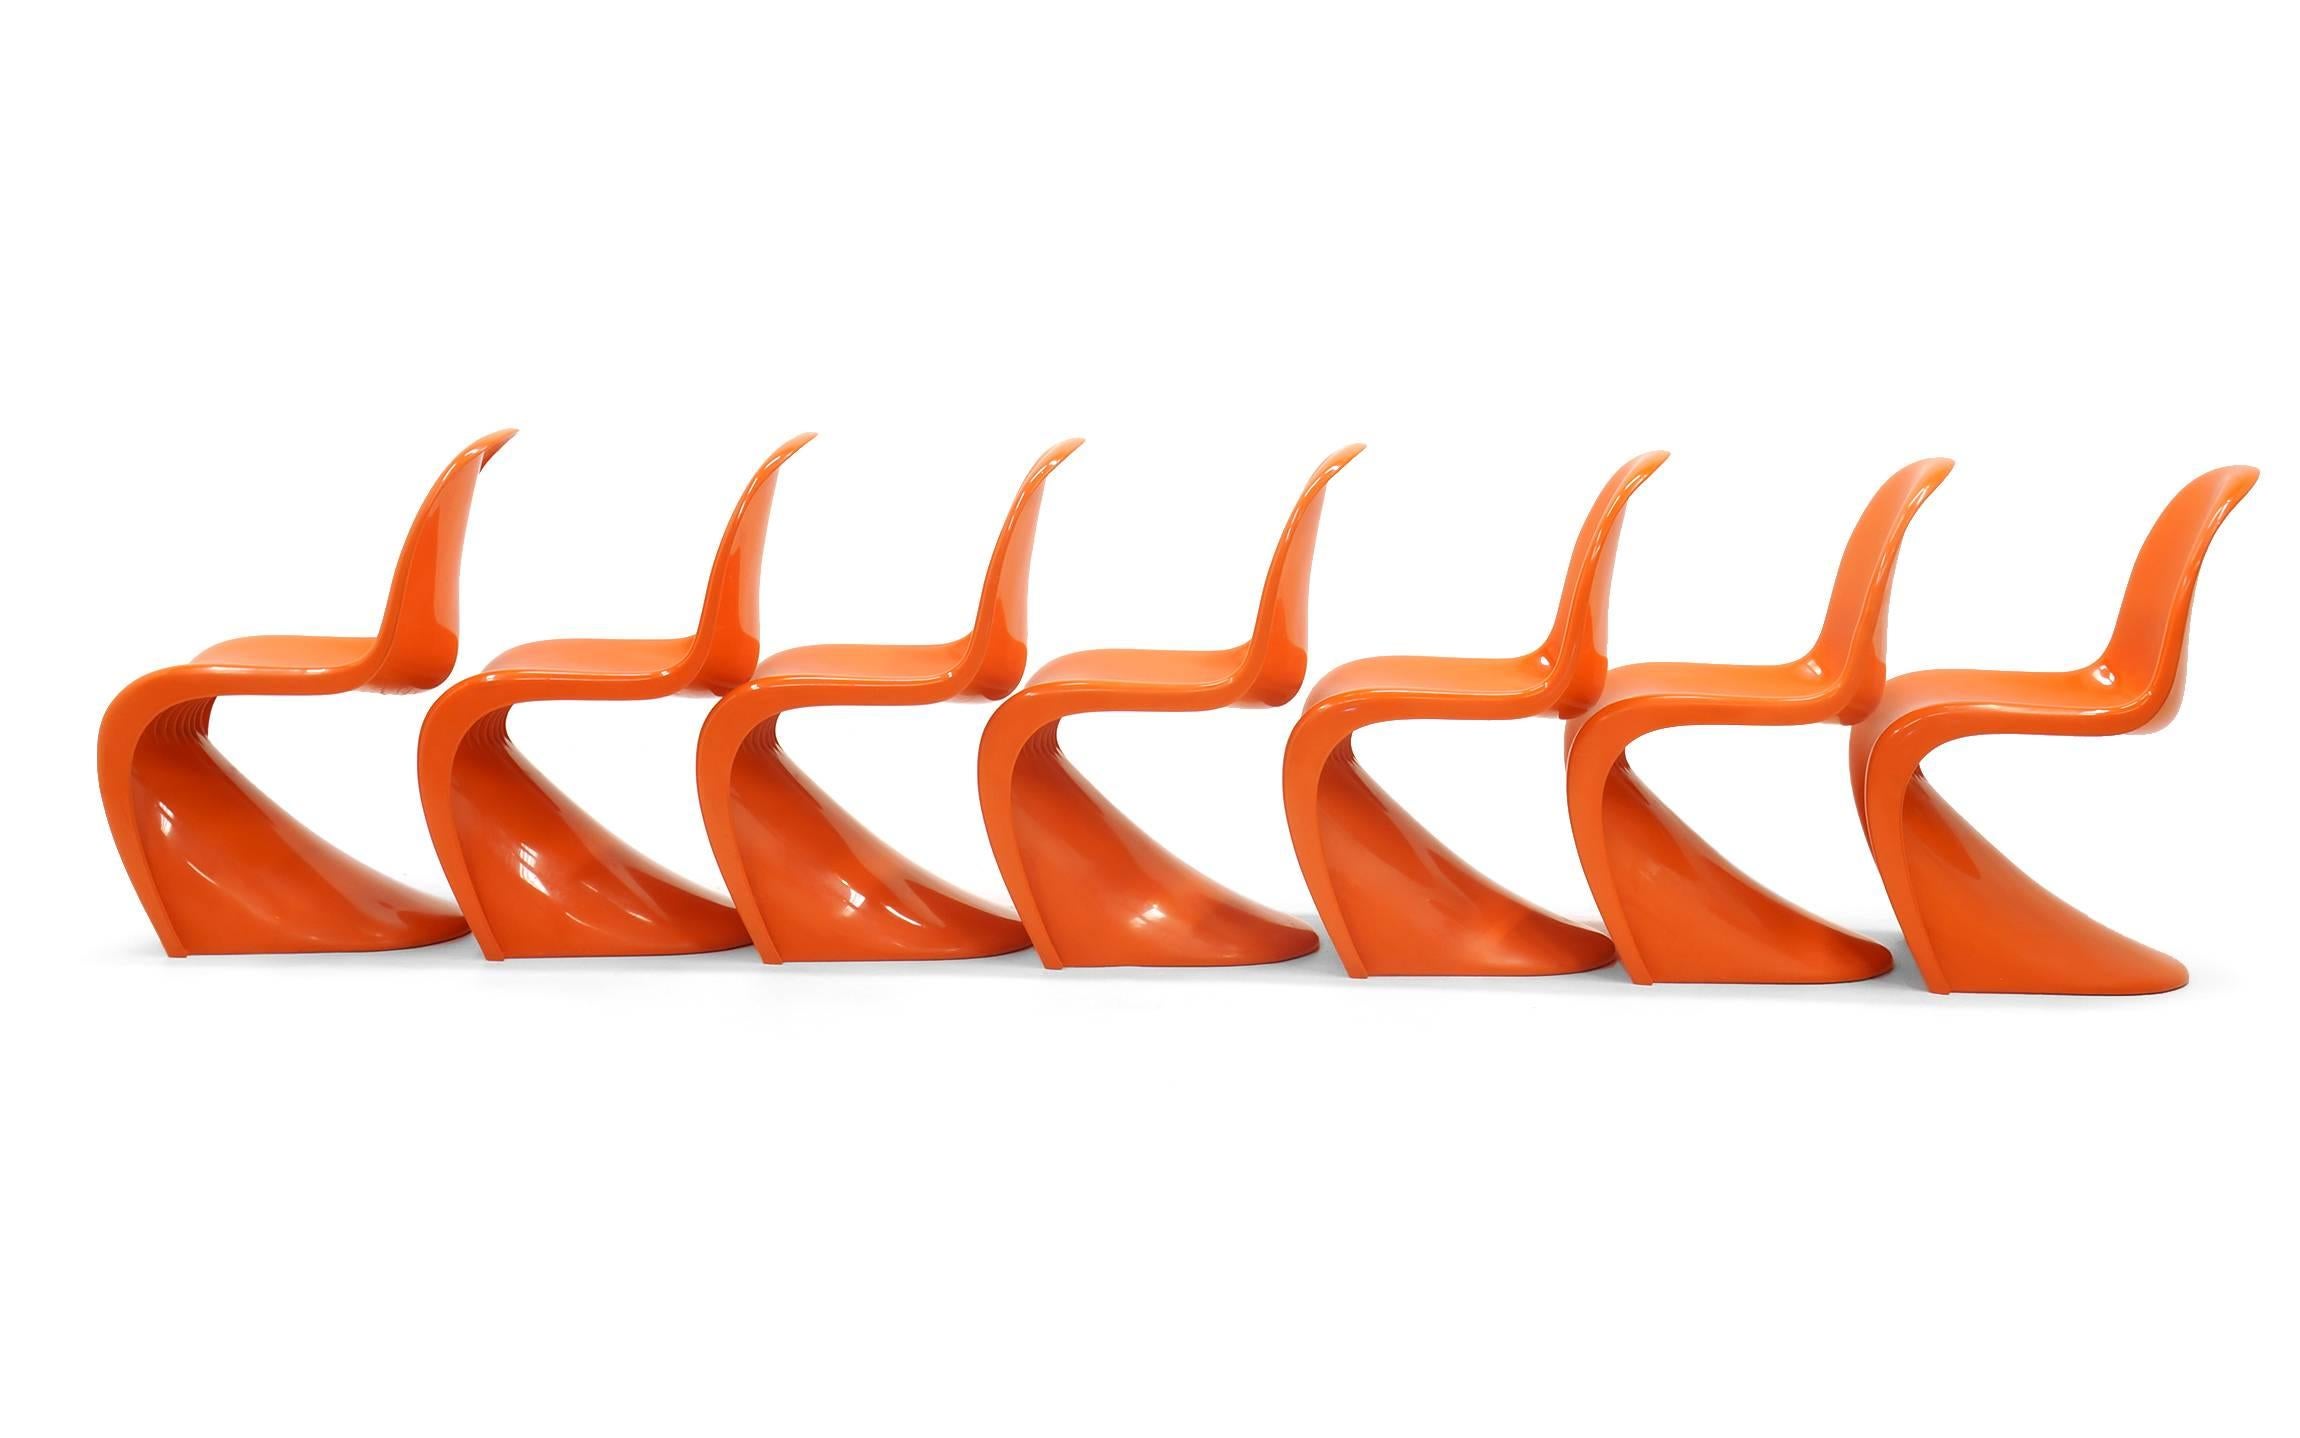 Three available.  The earliest version of the Iconic S chair in orange designed by Verner Panton, made by Vitra and sold by Herman Miller.  Each chair is embossed with the Herman Miller Logo.  This is the first all plastic chair ever produced.